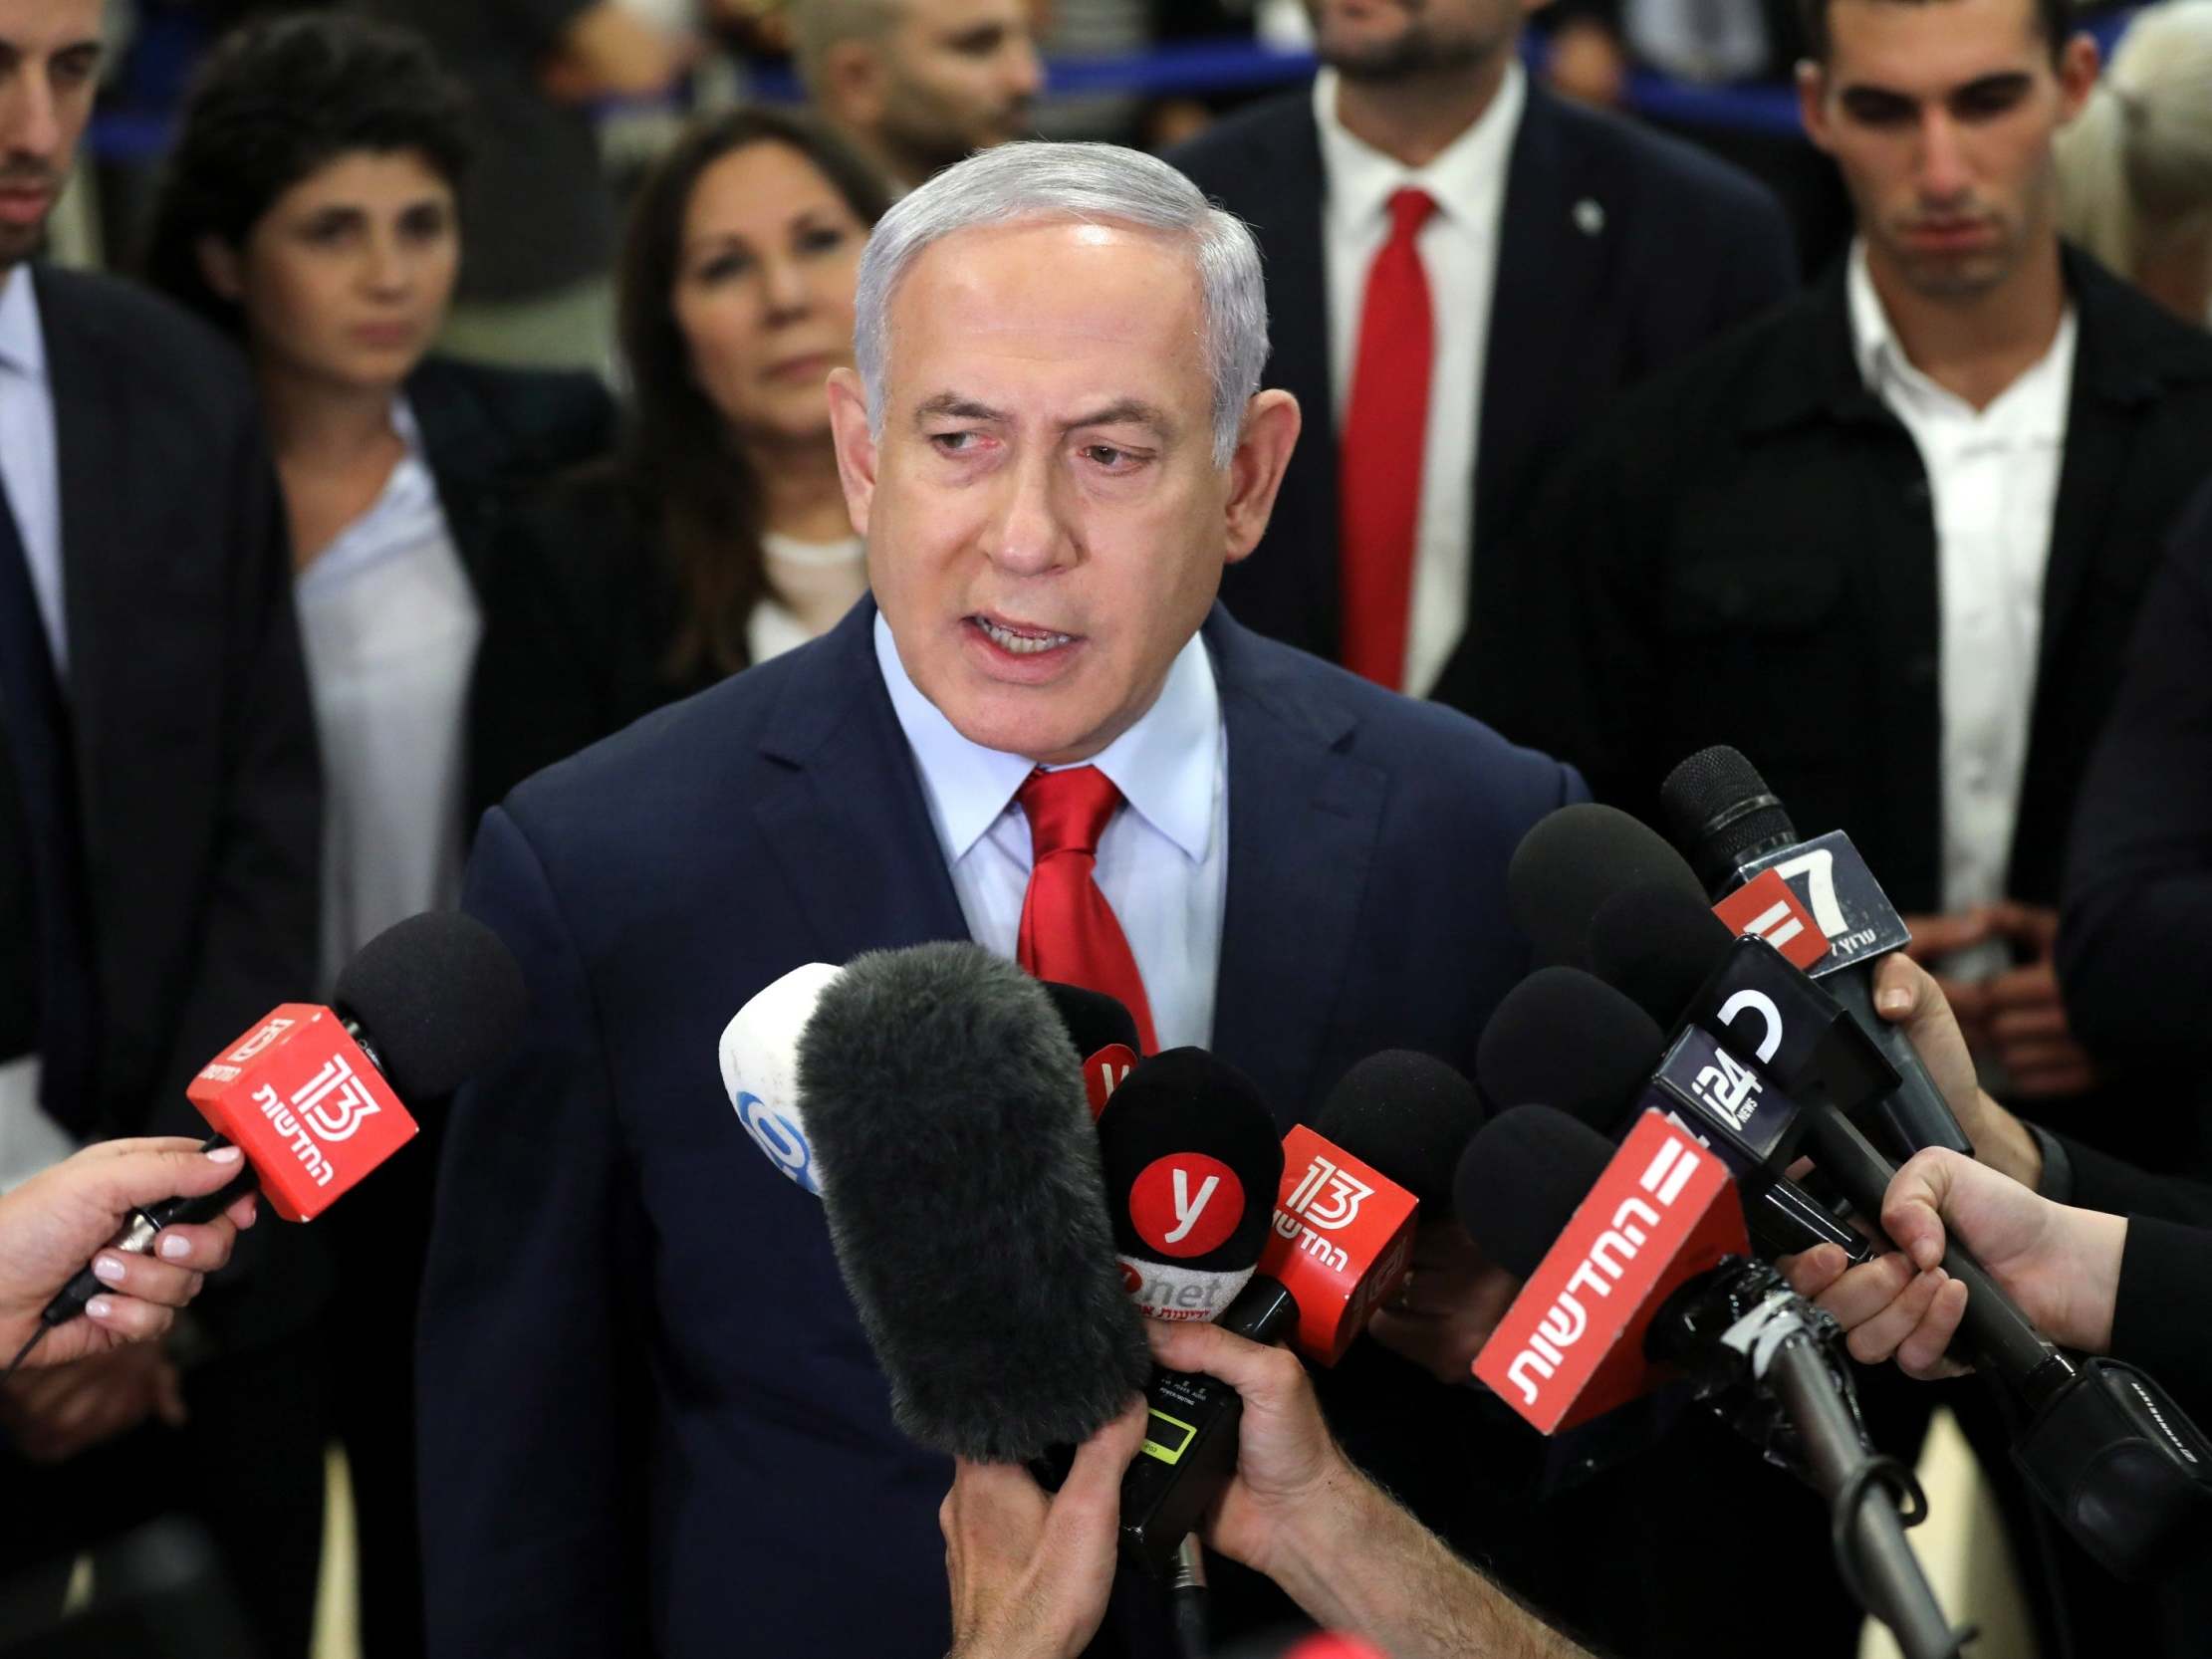 Benjamin Netanyahu speaks to the press yesterday after the Knesset vote